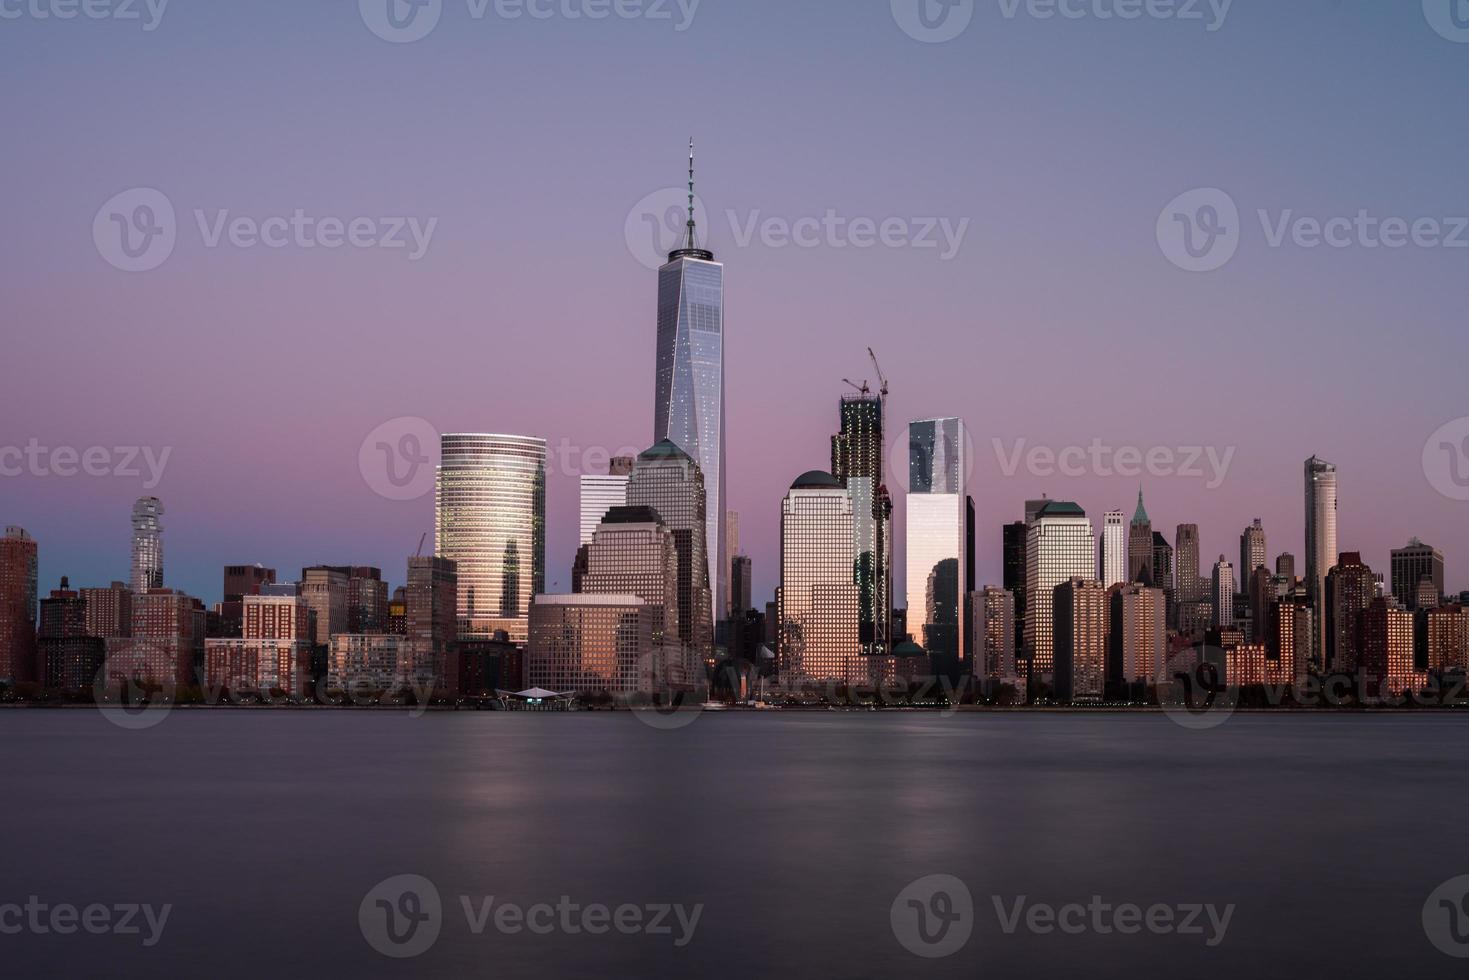 New York skyline as viewed across the Hudson River in New Jersey at sunset. photo